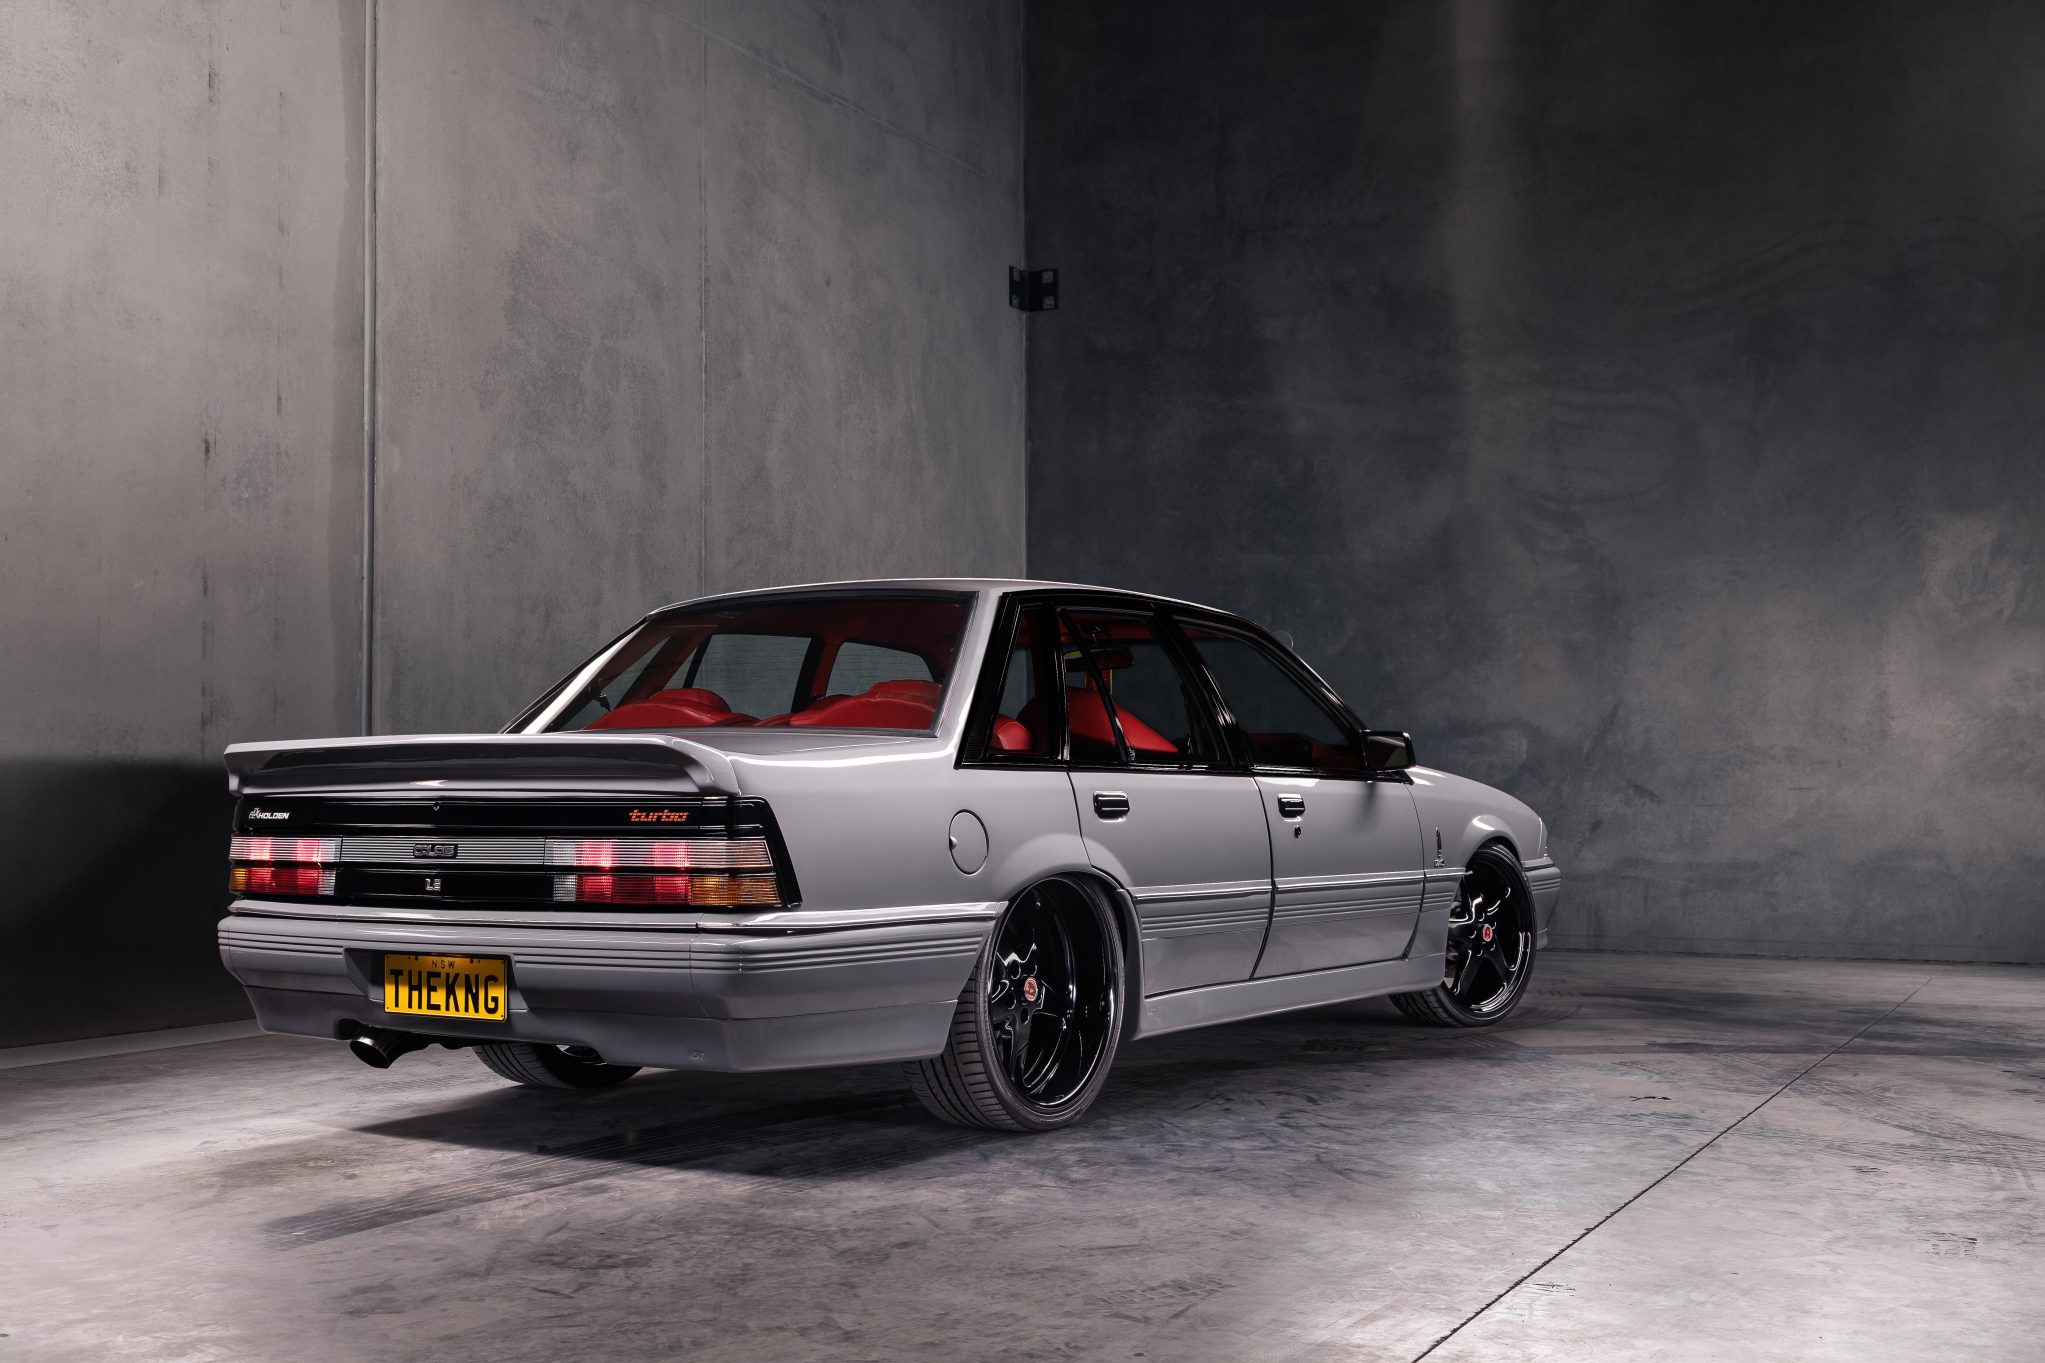 Street Machine Features Stefan Tomevski Vl Commodore Thekng Rear Angle